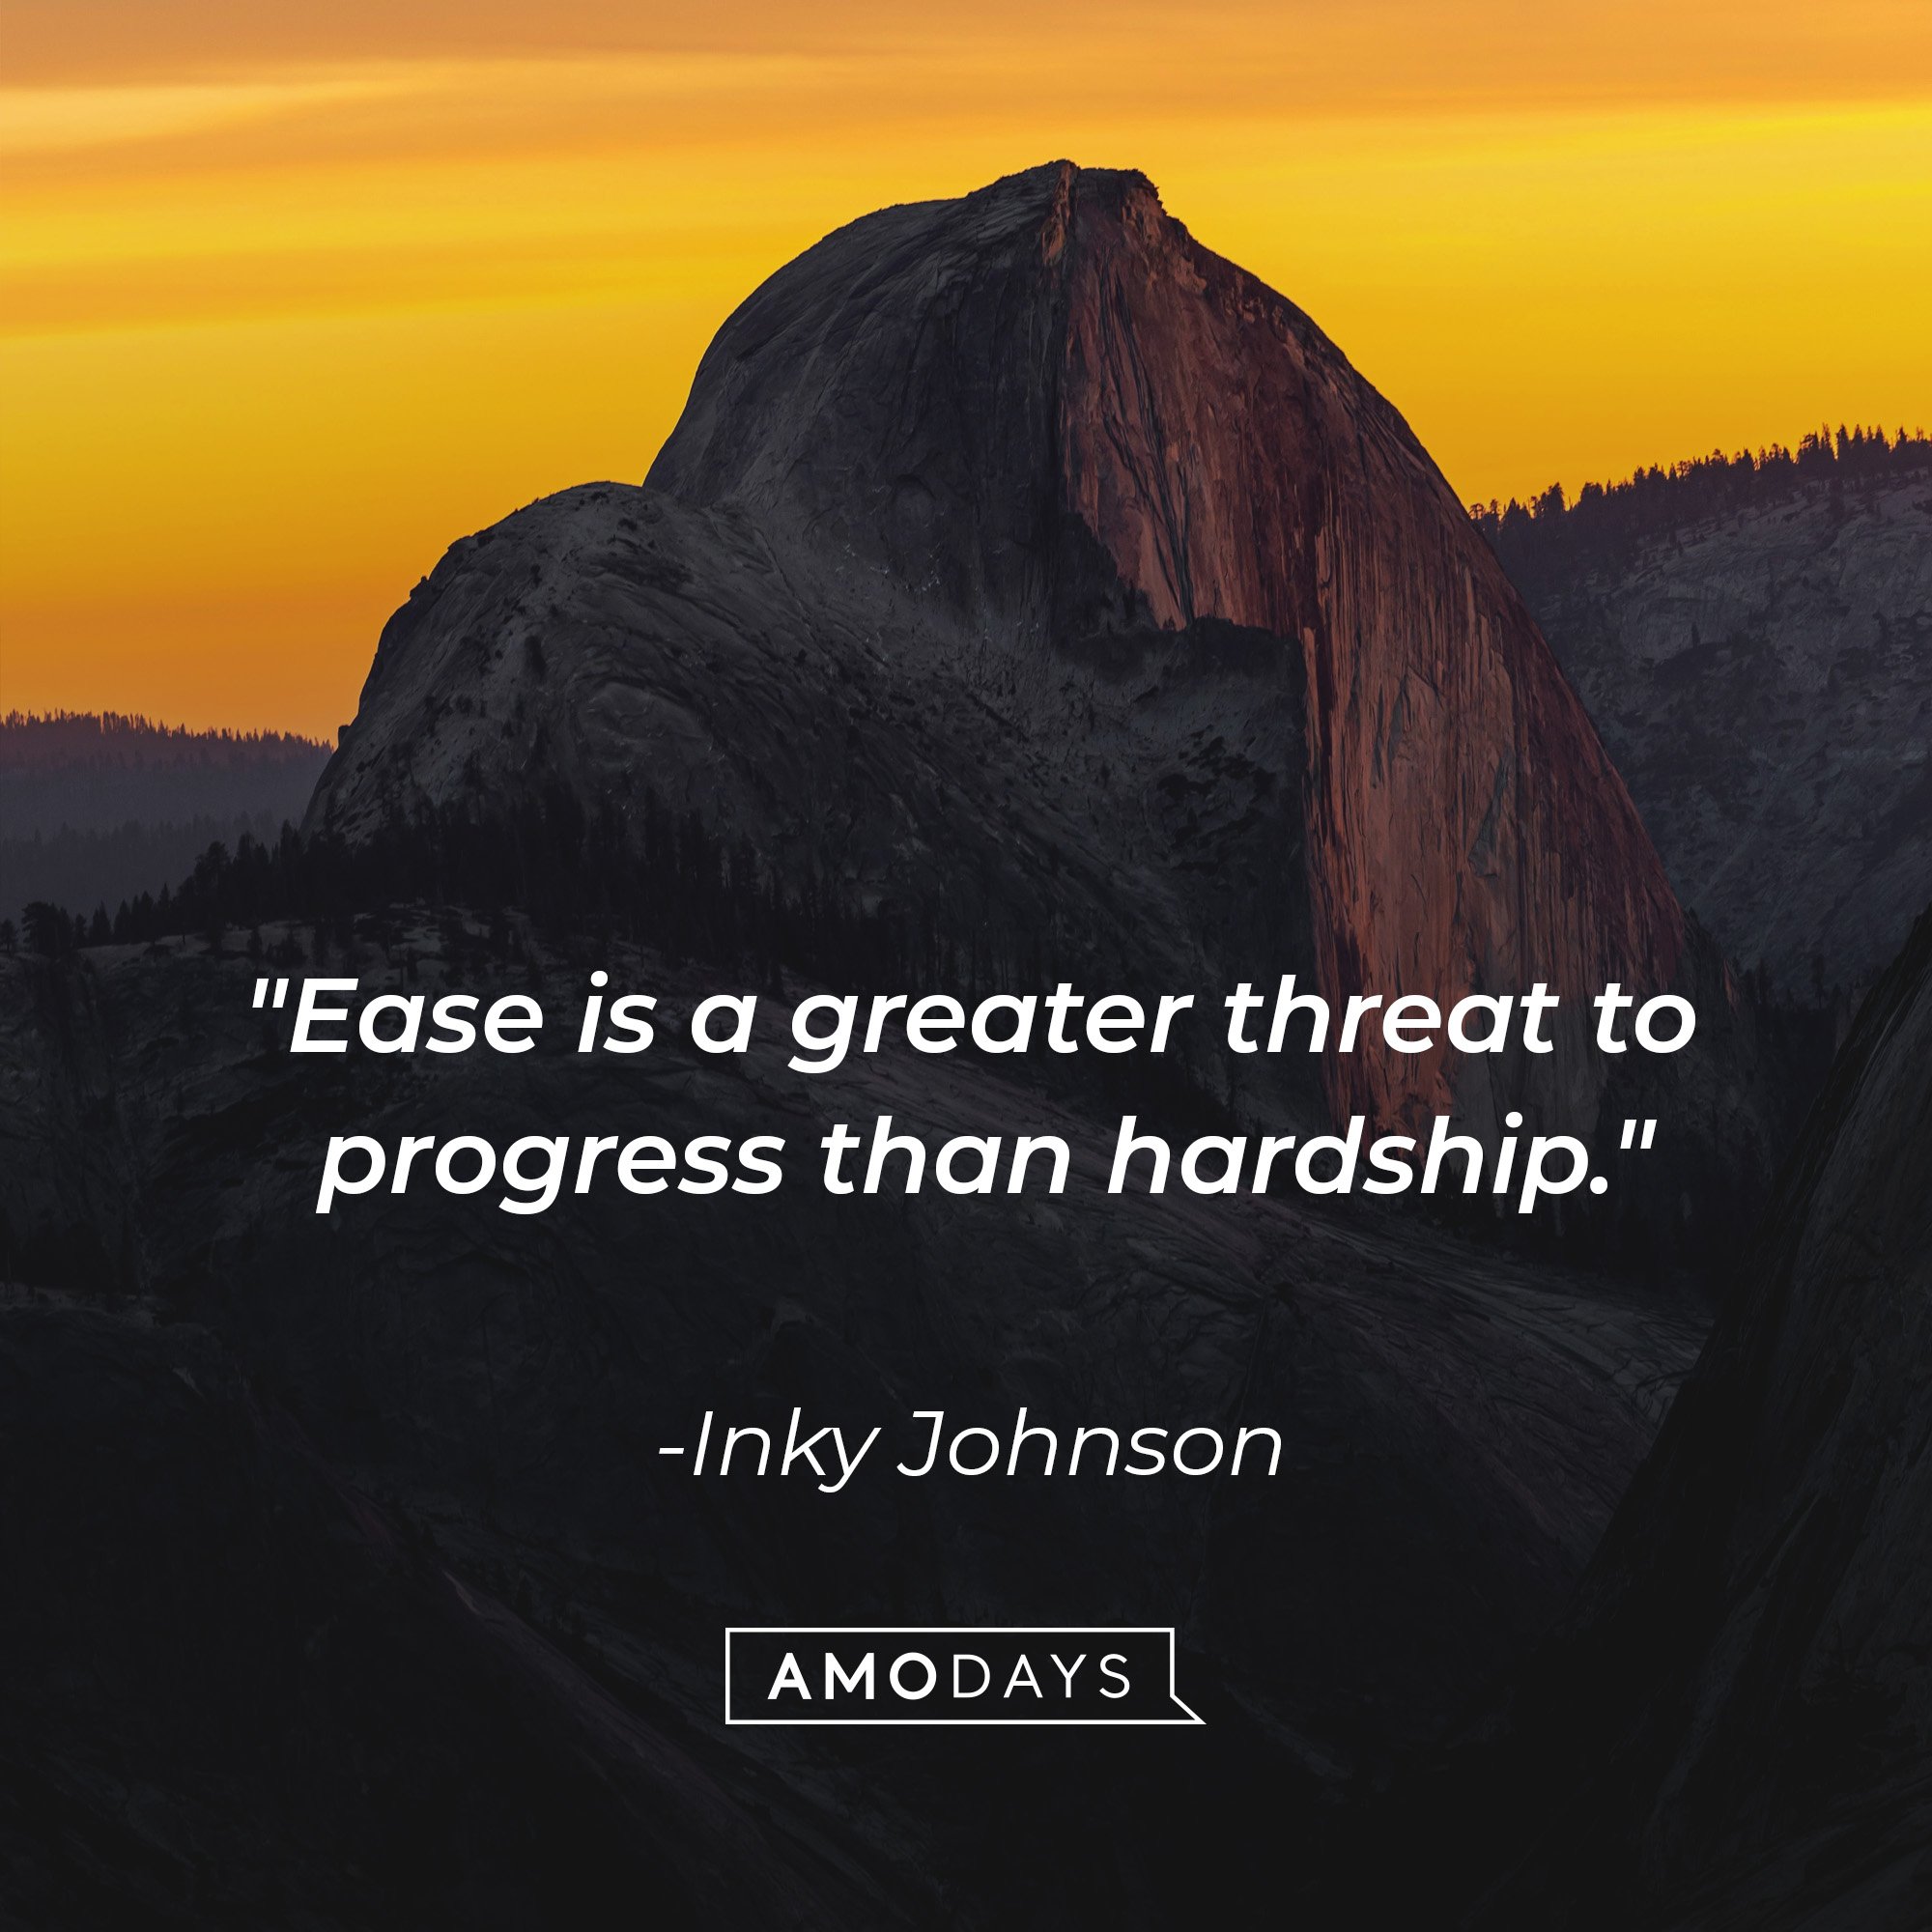 Inky Johnson's quote: "Ease is a greater threat to progress than hardship."  | Image: AmoDays